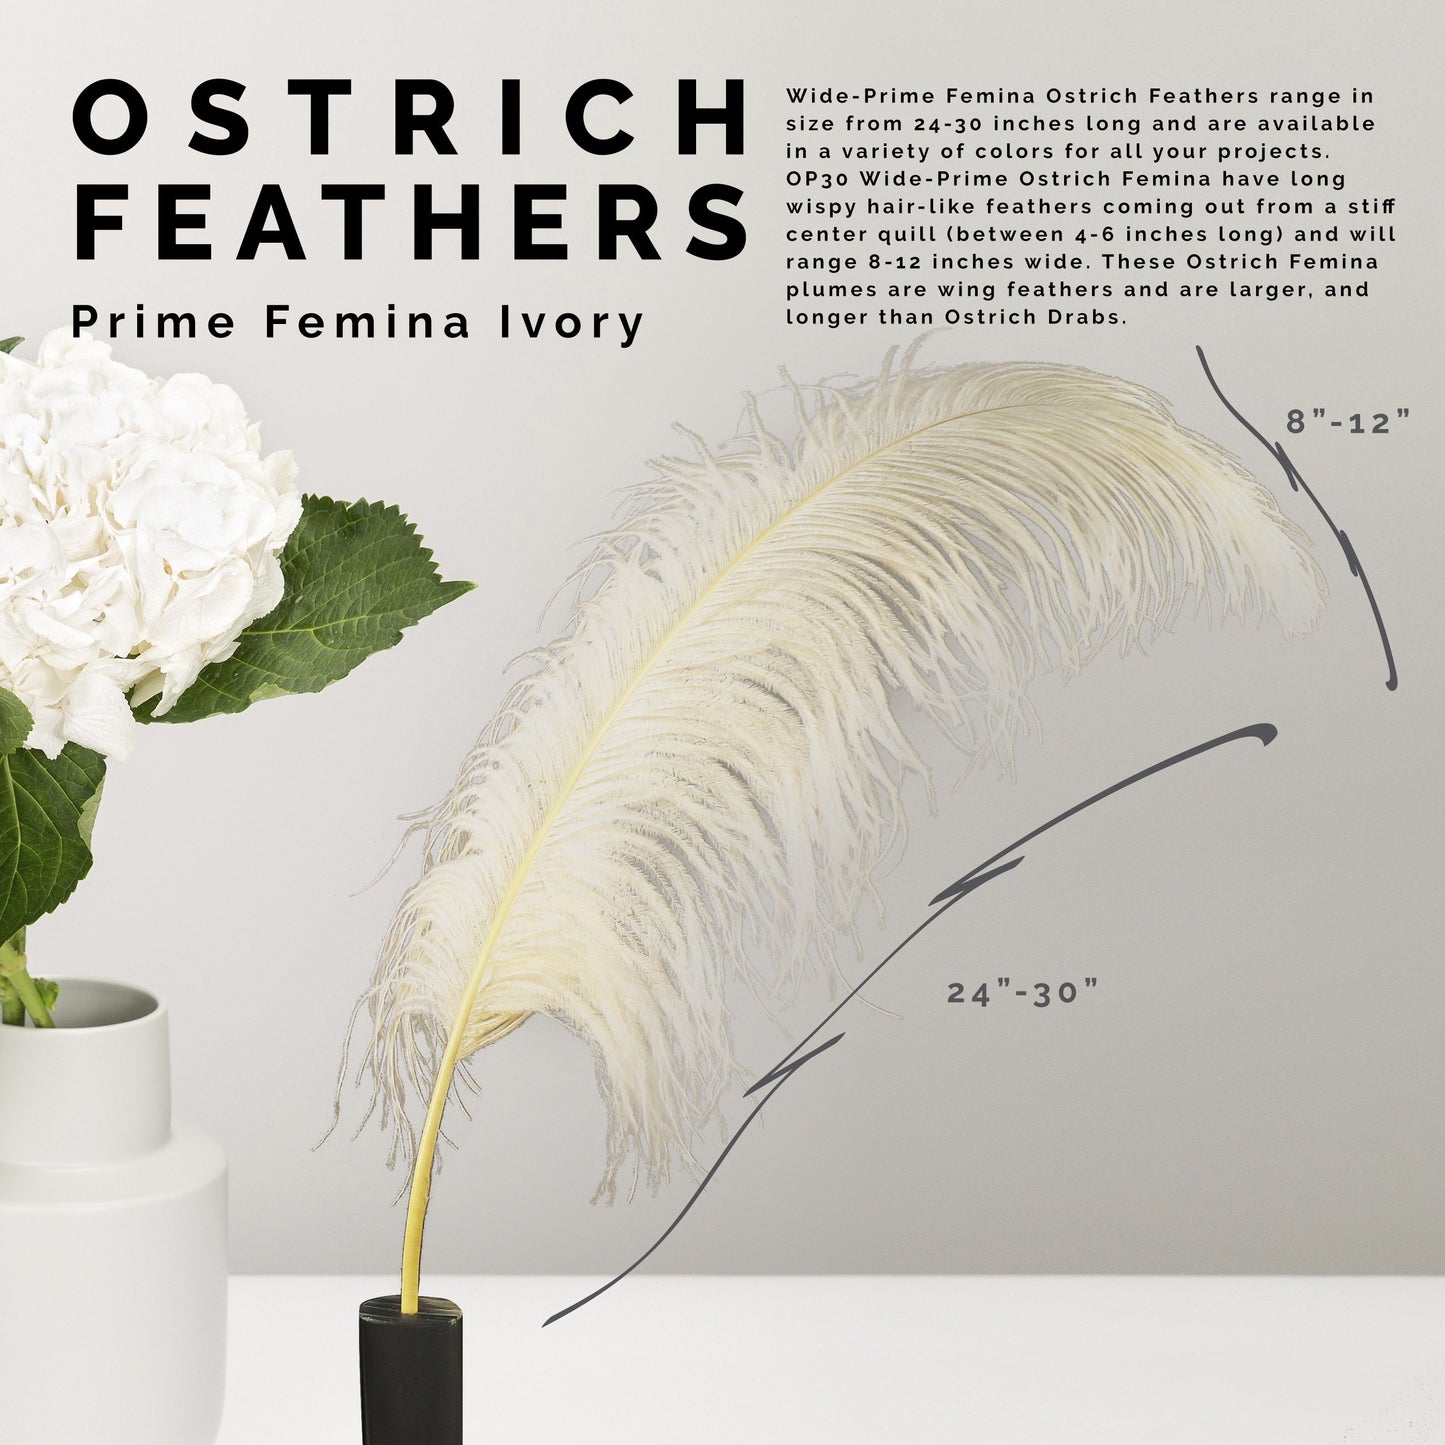 Large Ostrich Feathers - 24-30" Prime Femina Plumes - Ivory